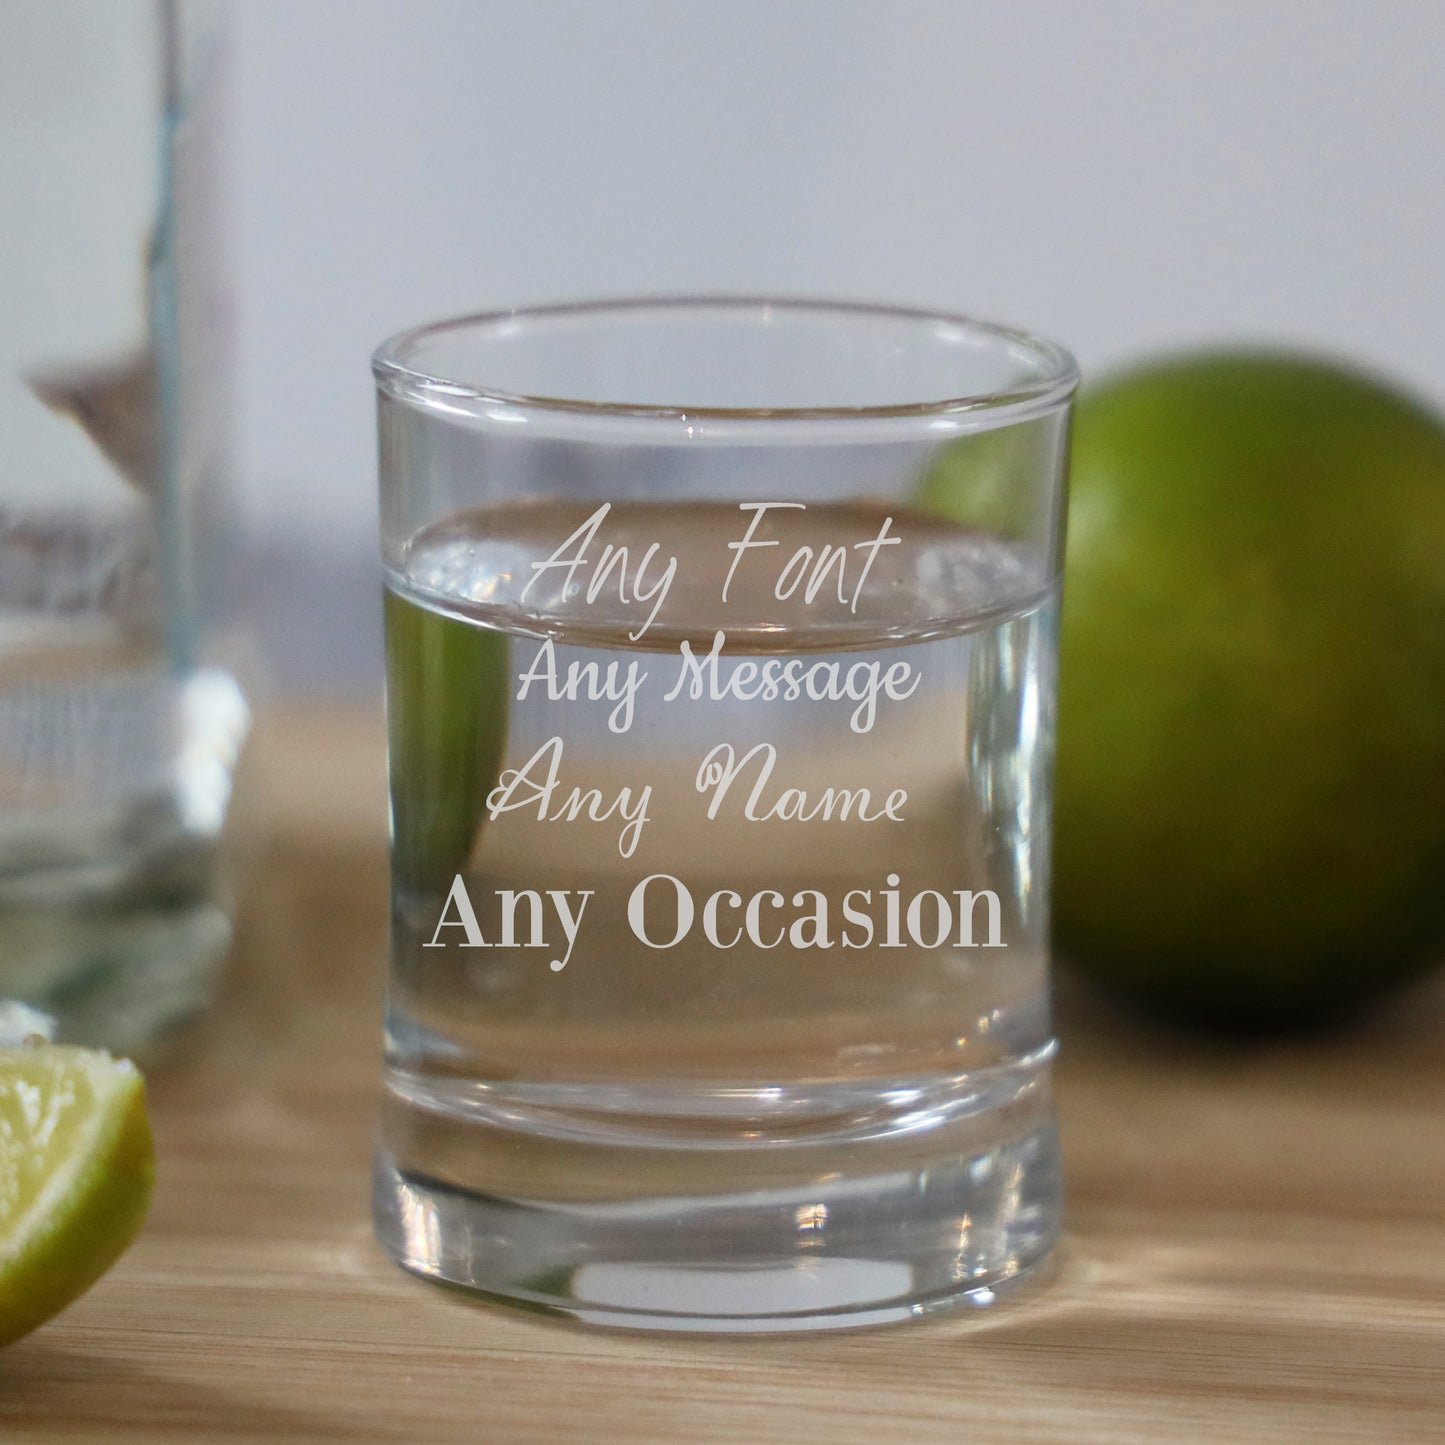 Create Your Own Personalised Engraved Shot Glass  - Always Looking Good -   